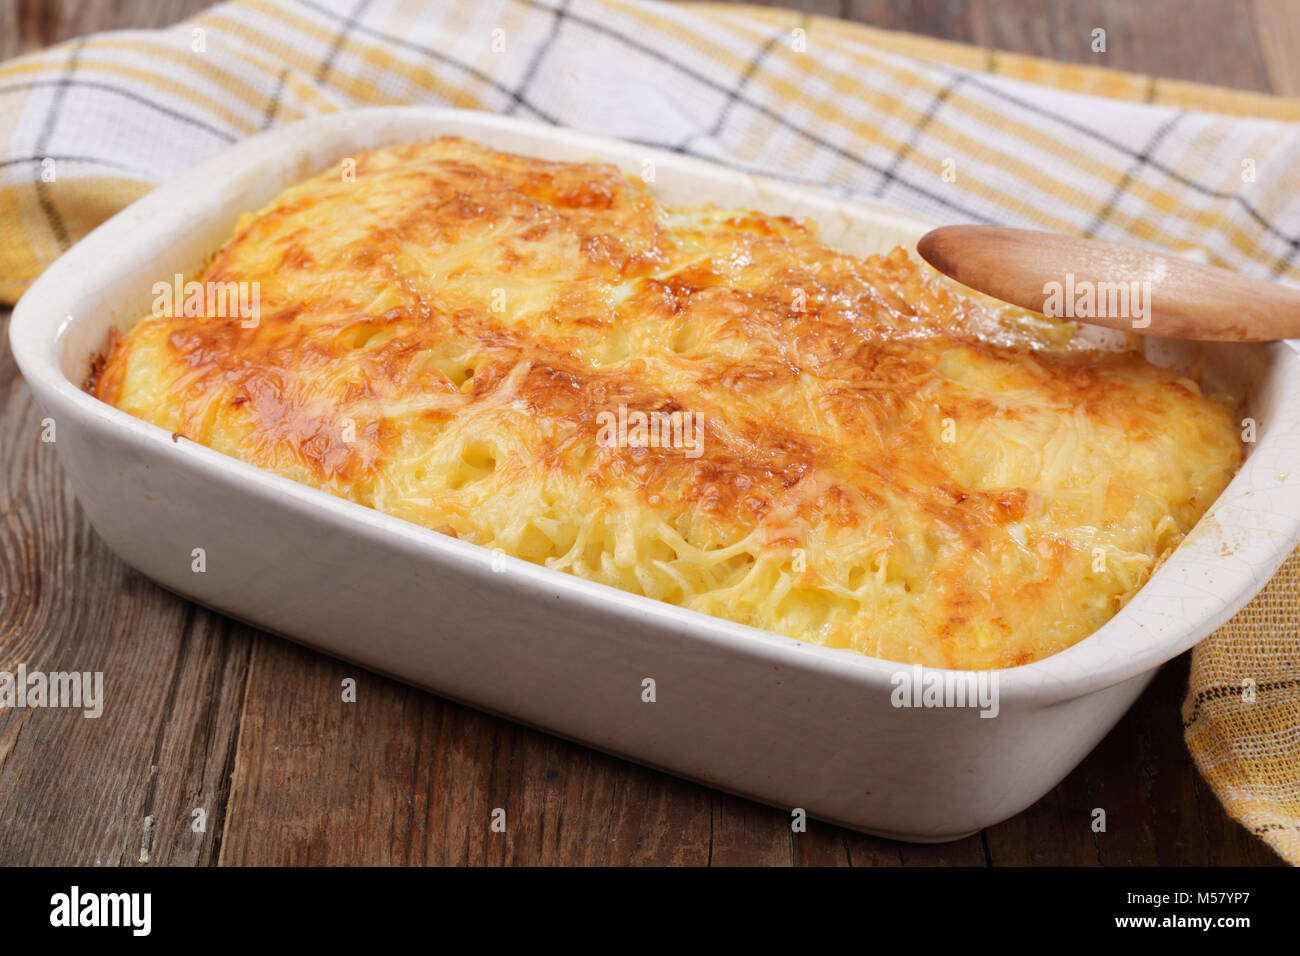 Gratin with pasta, beaten eggs, and cheese, in white casserole Stock Photo